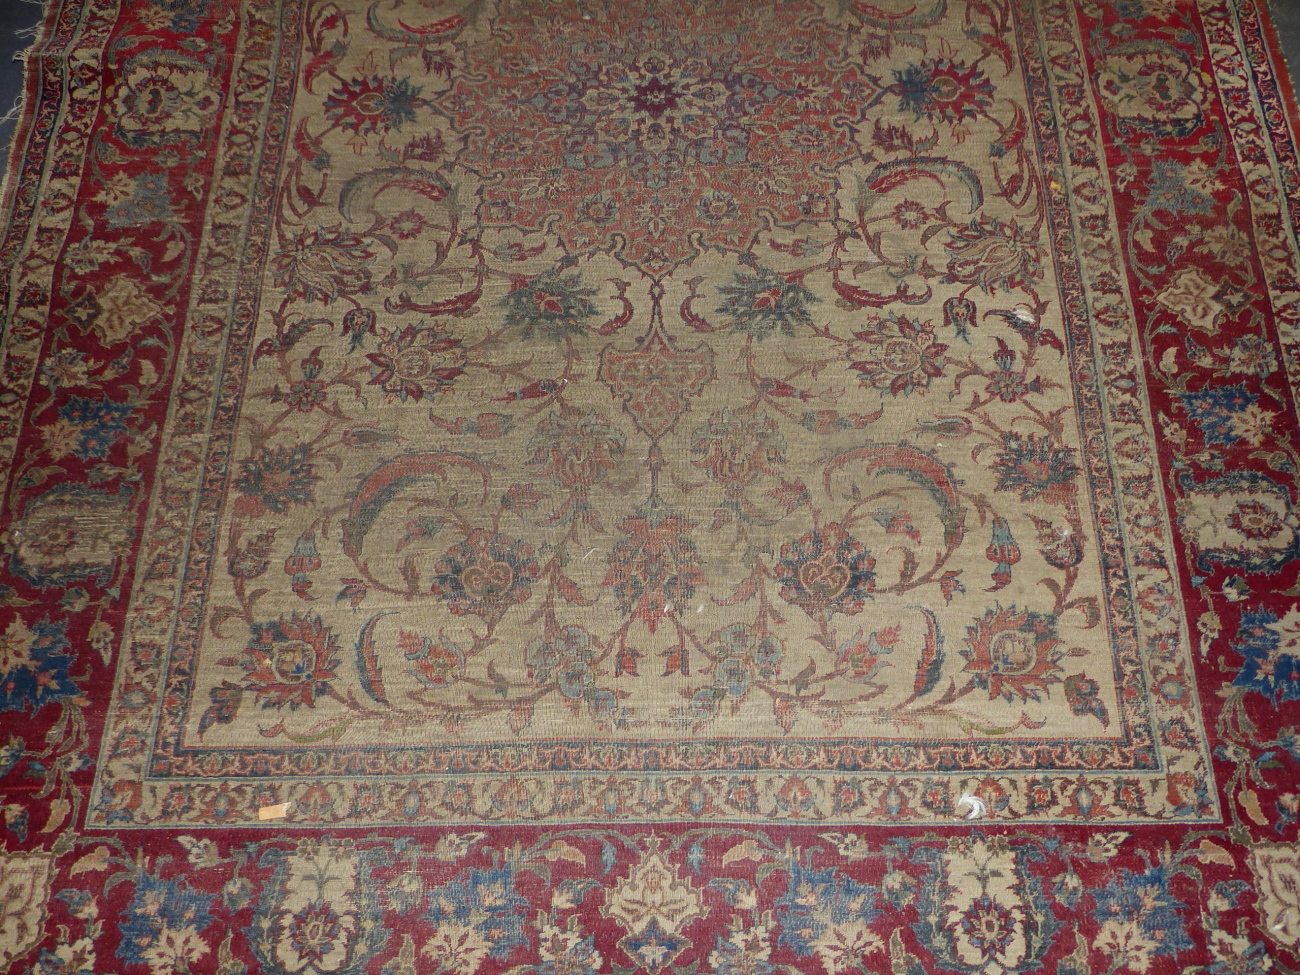 AN ANTIQUE PERSIAN ISFAHAN RUG. 207 x 145cms. - Image 2 of 7